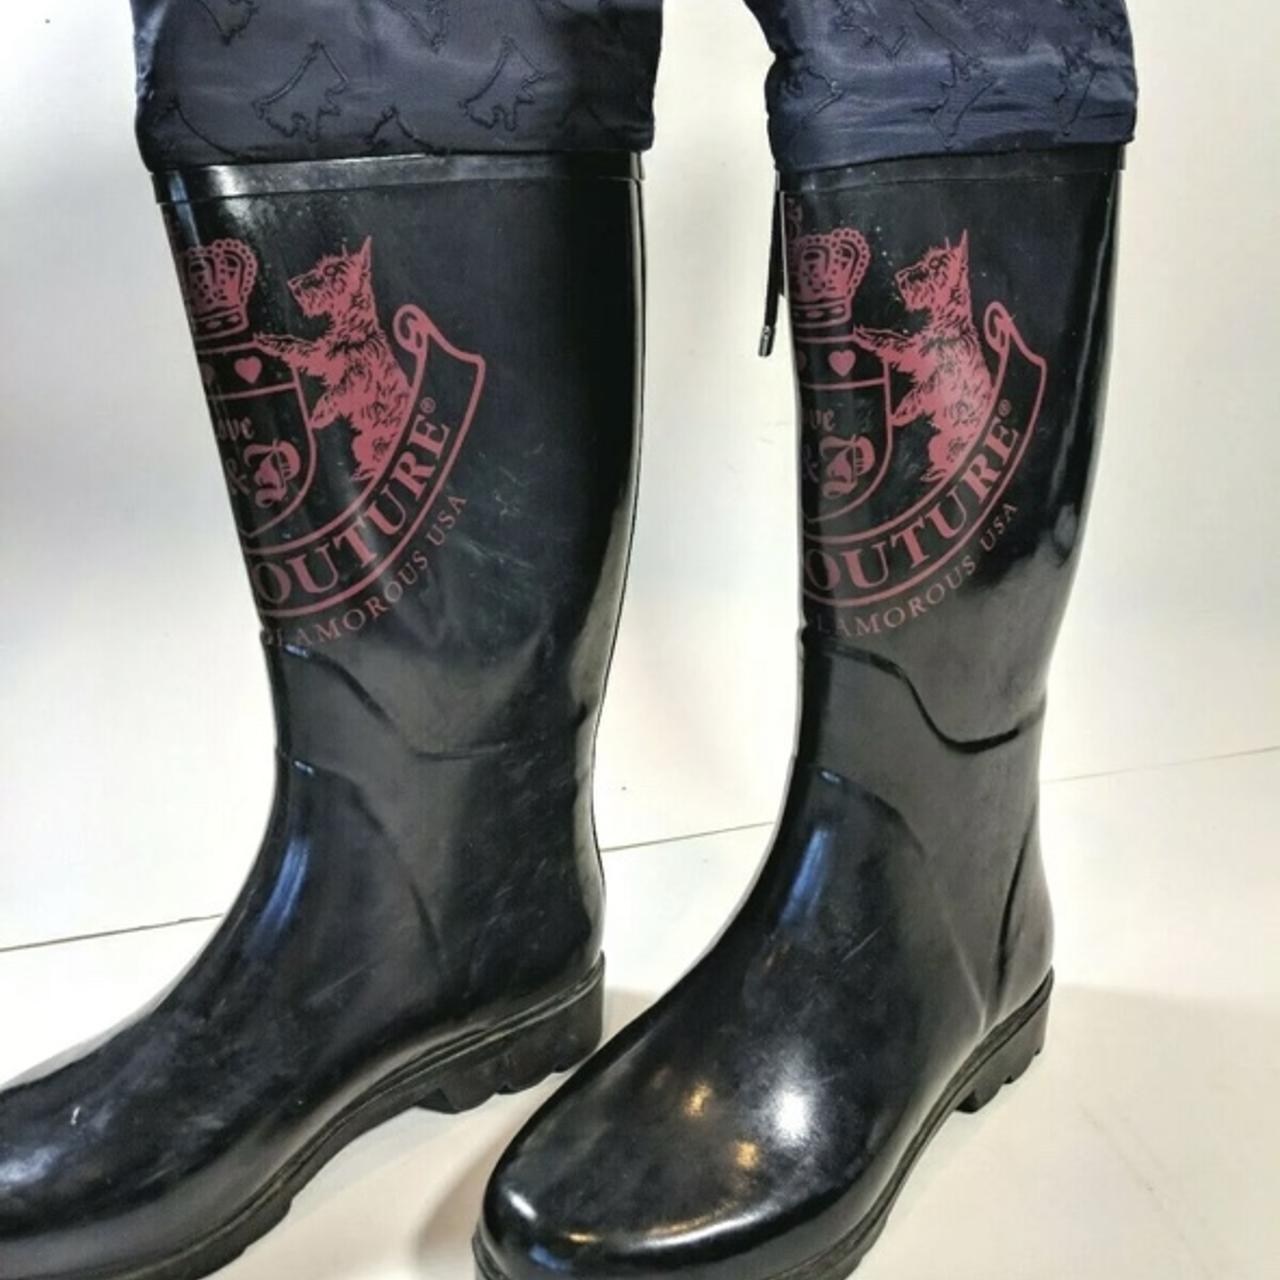 Y2K Juicy Couture PINK SCOTTIE DOG WELLIES TALL RAIN BOOTS 9 WELLINGTON